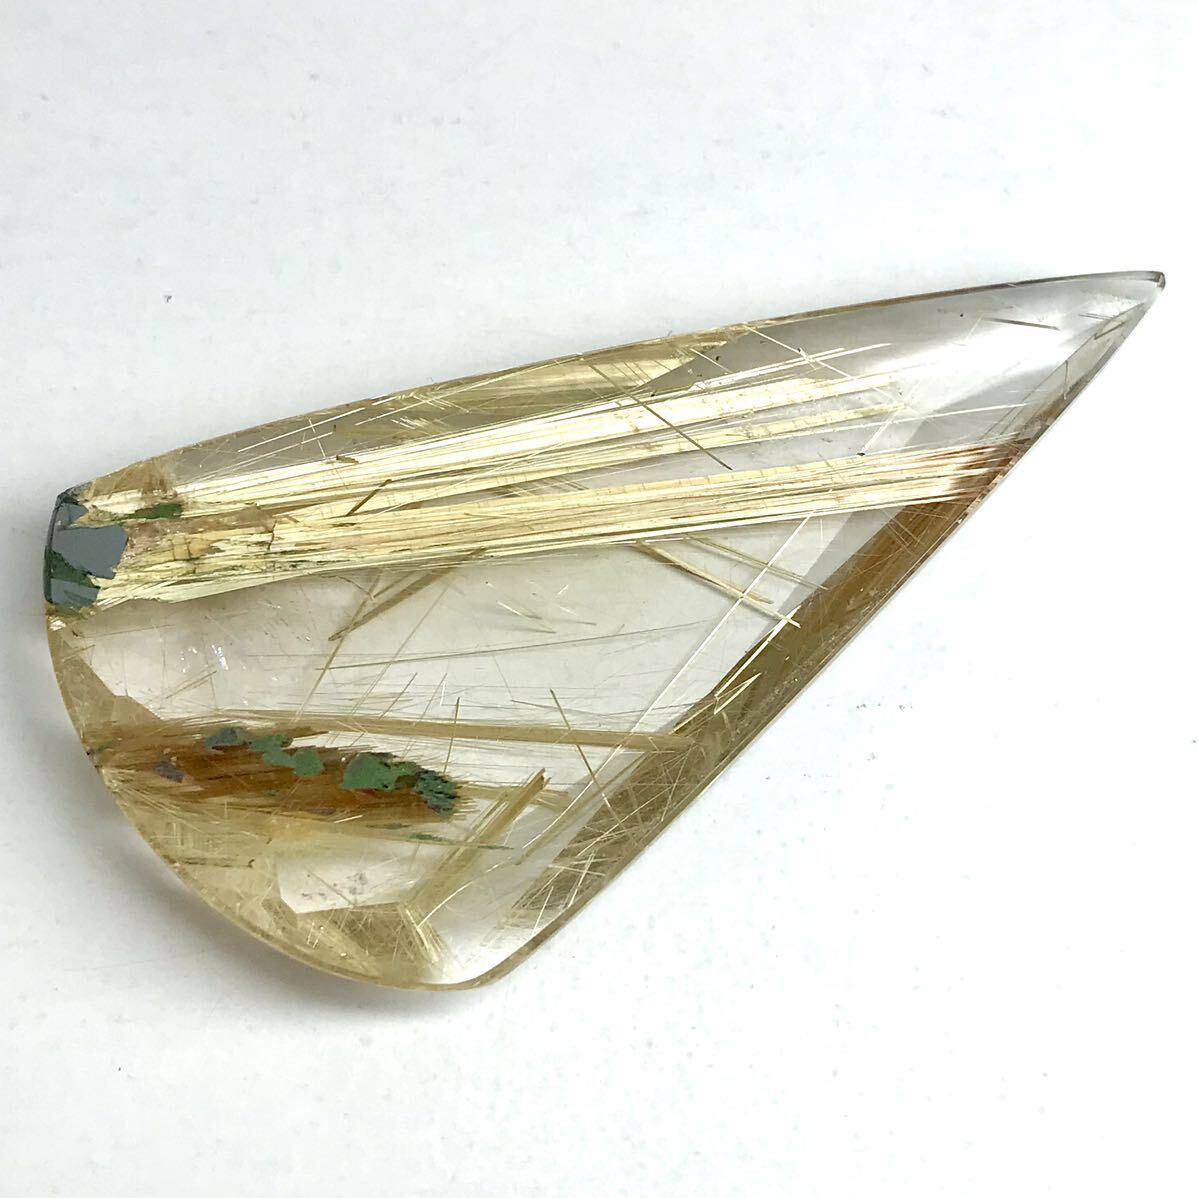 60ctUP!!( natural ruchire.tedo quartz 60.535ct)m approximately 56.0×29.2mm loose unset jewel rutilequartz rutile so-ting attaching gem jewelry i